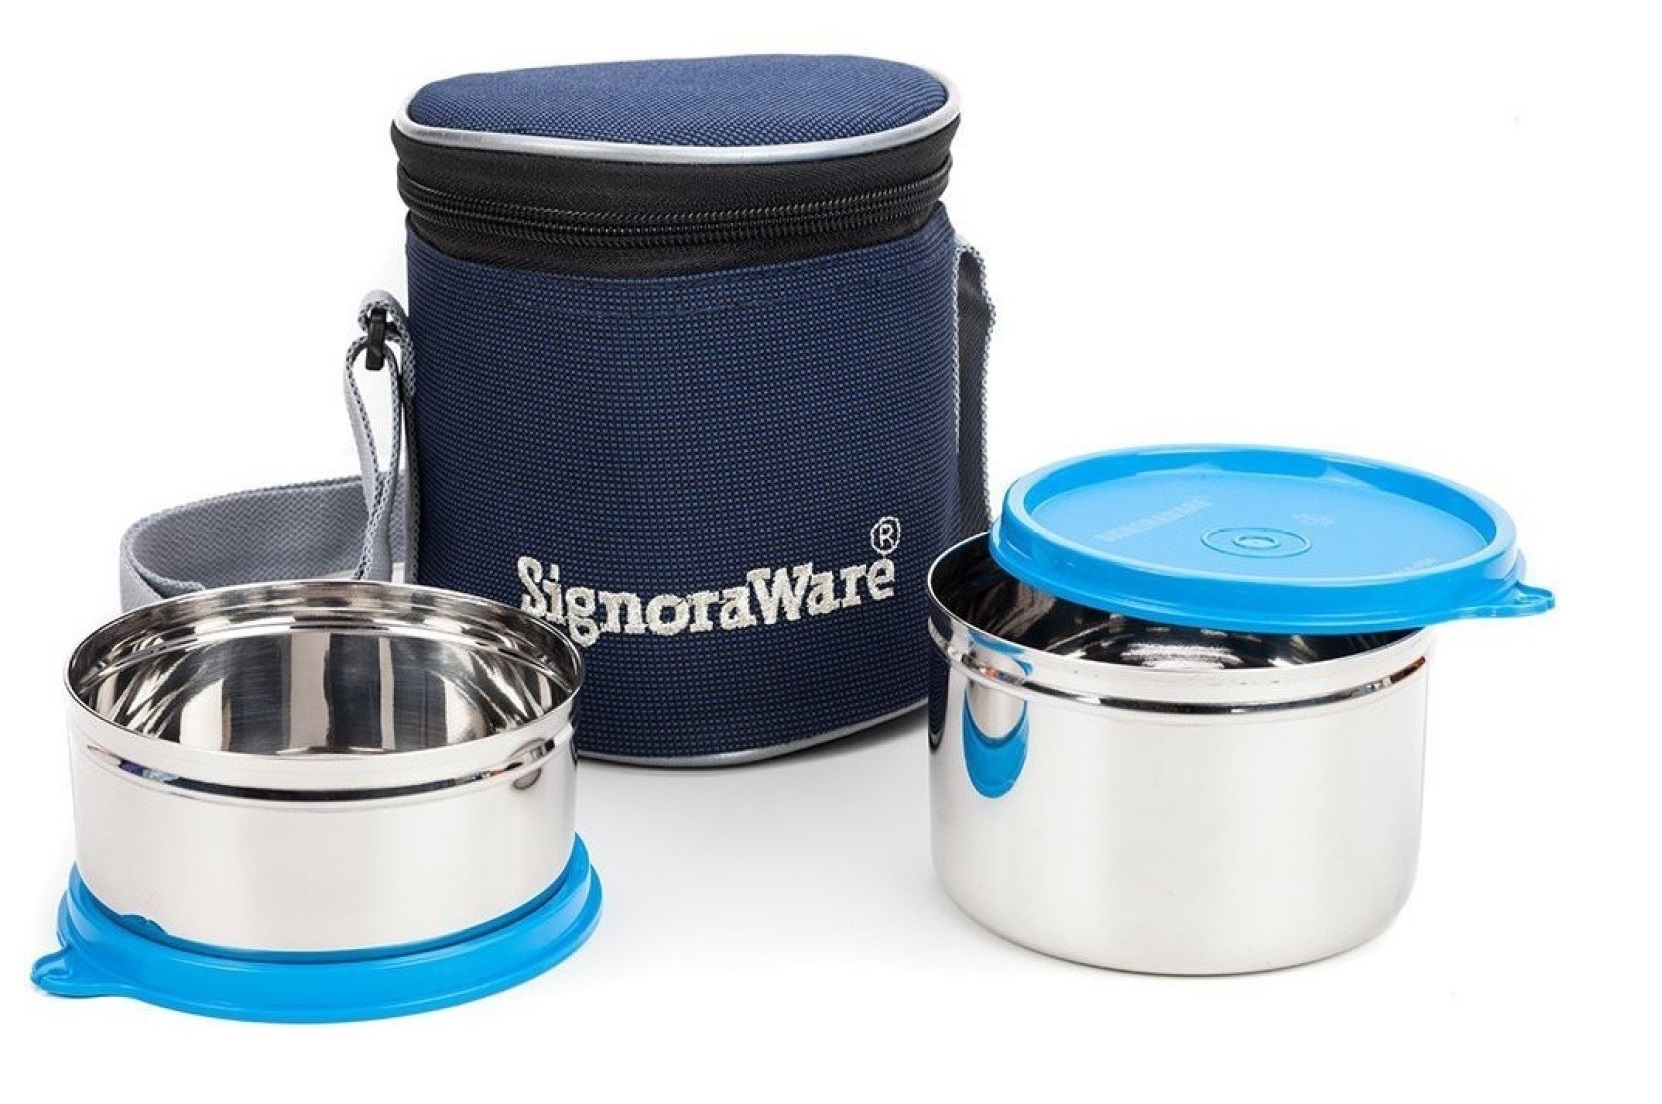 Synecart – Signoraware Best Steel Lunch Box, Blue, 3 Containers Online